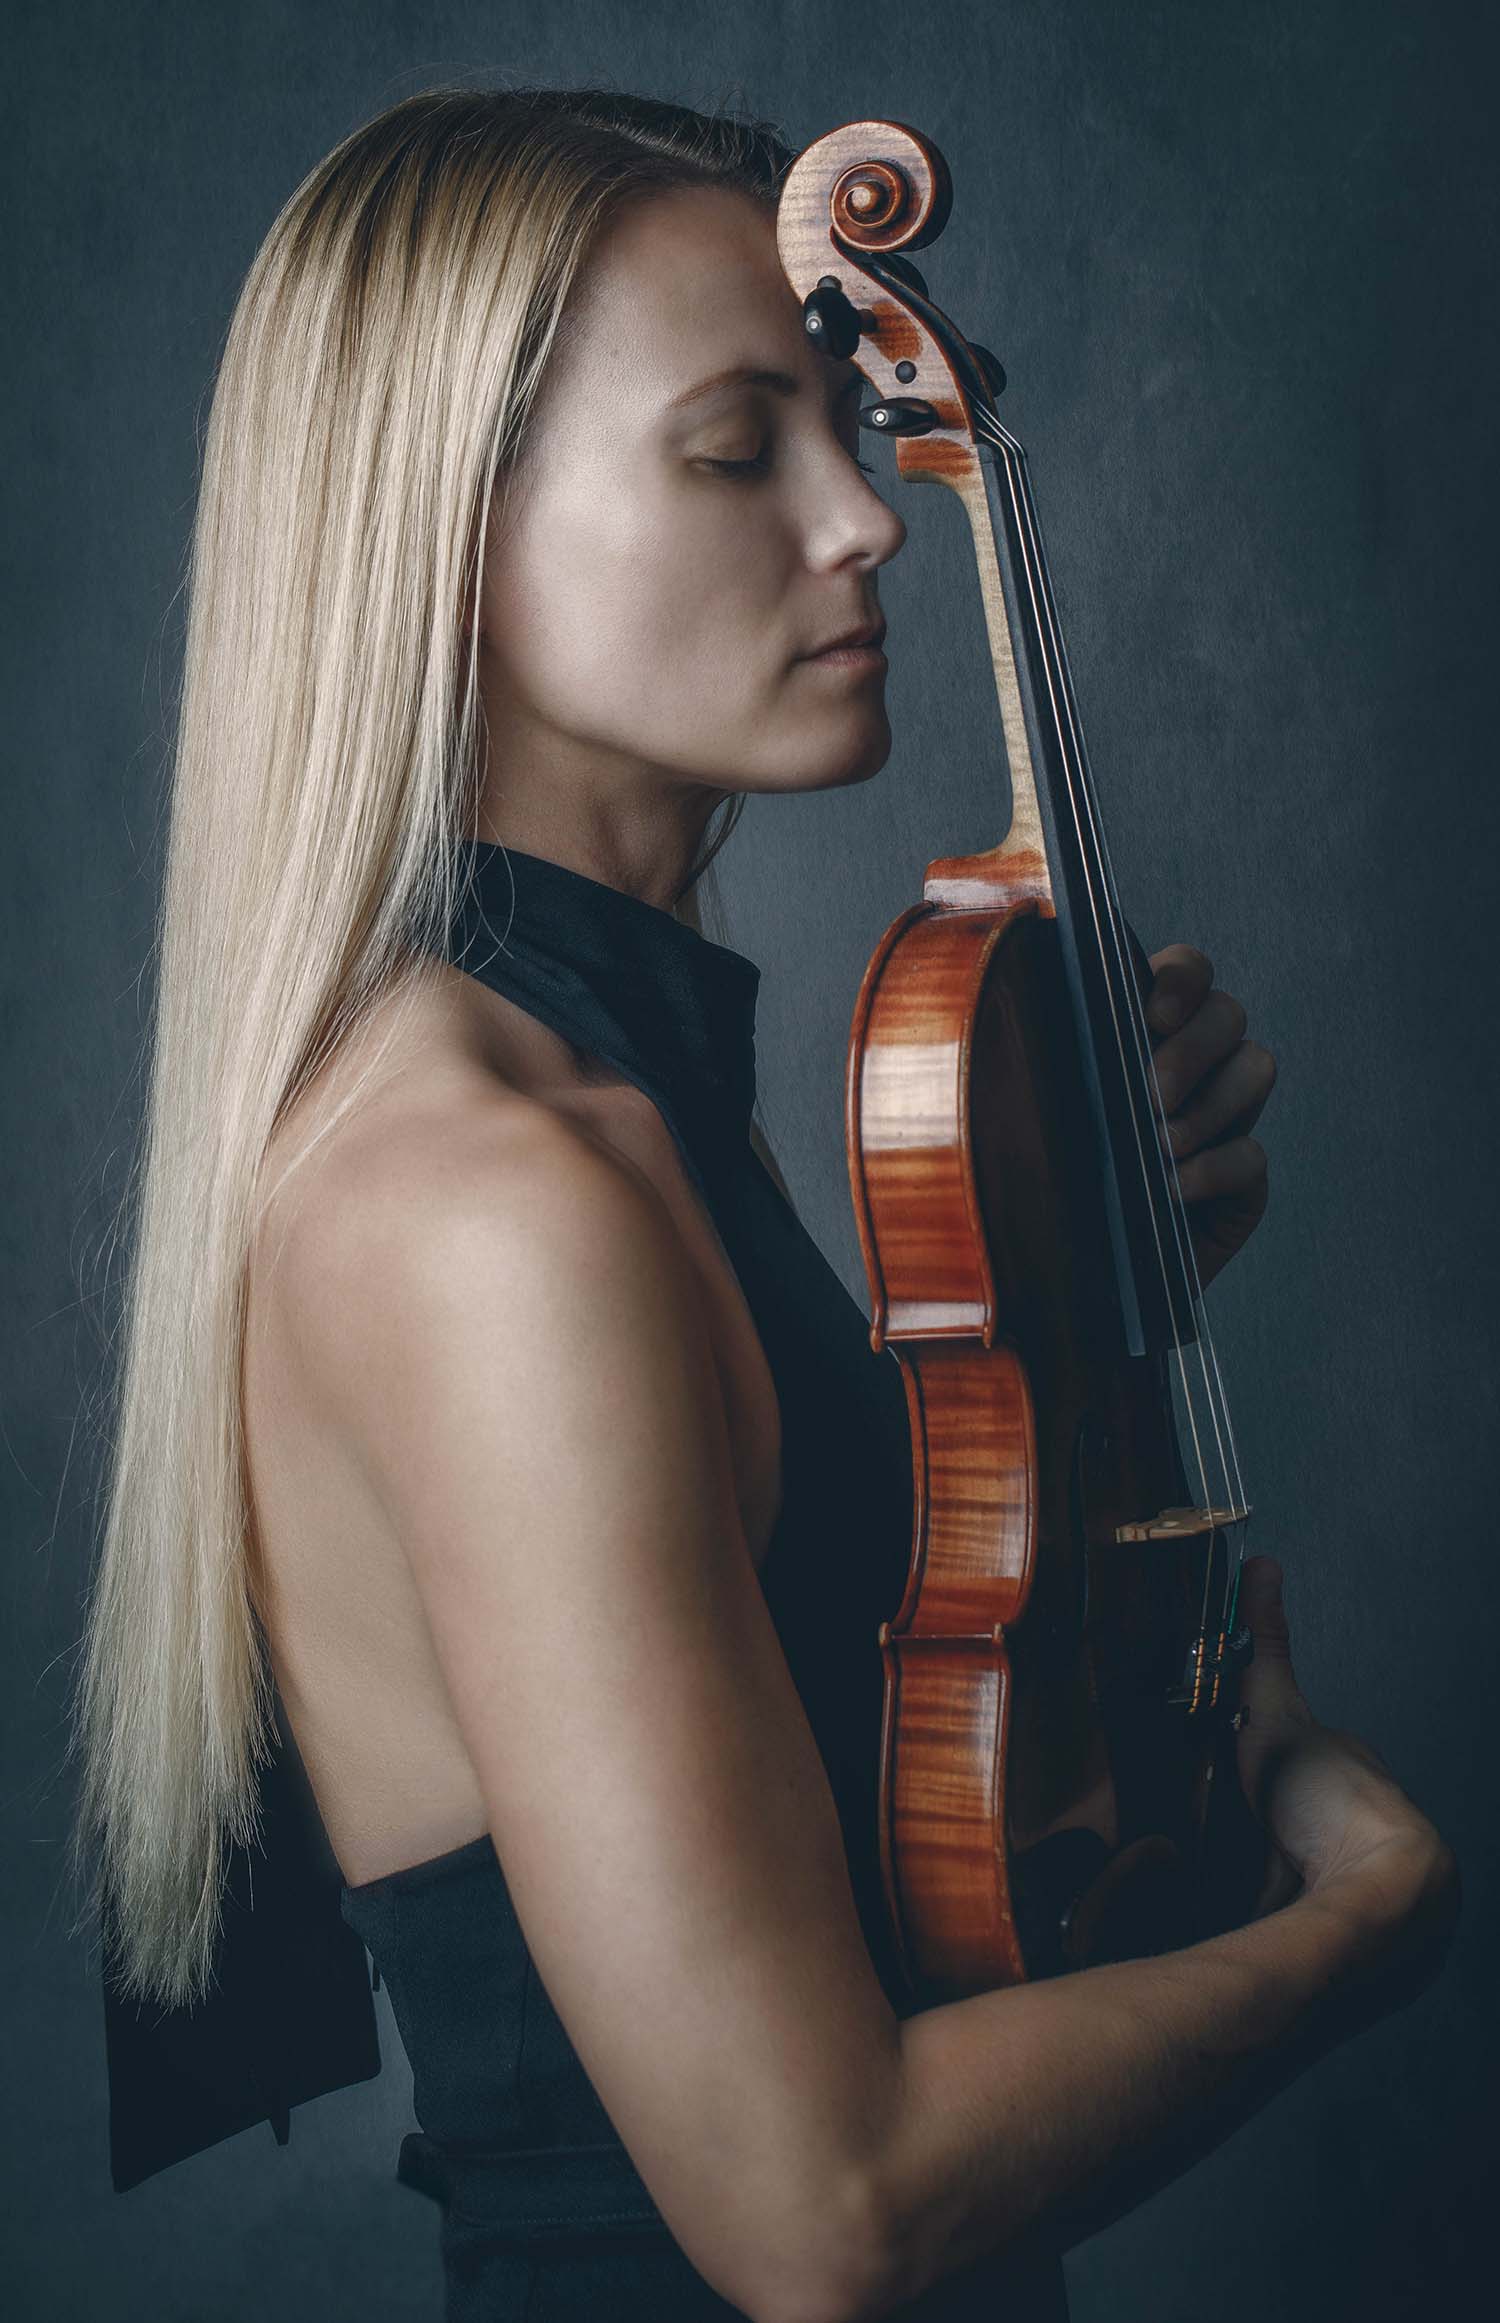 violinist with closed eyes and her violin